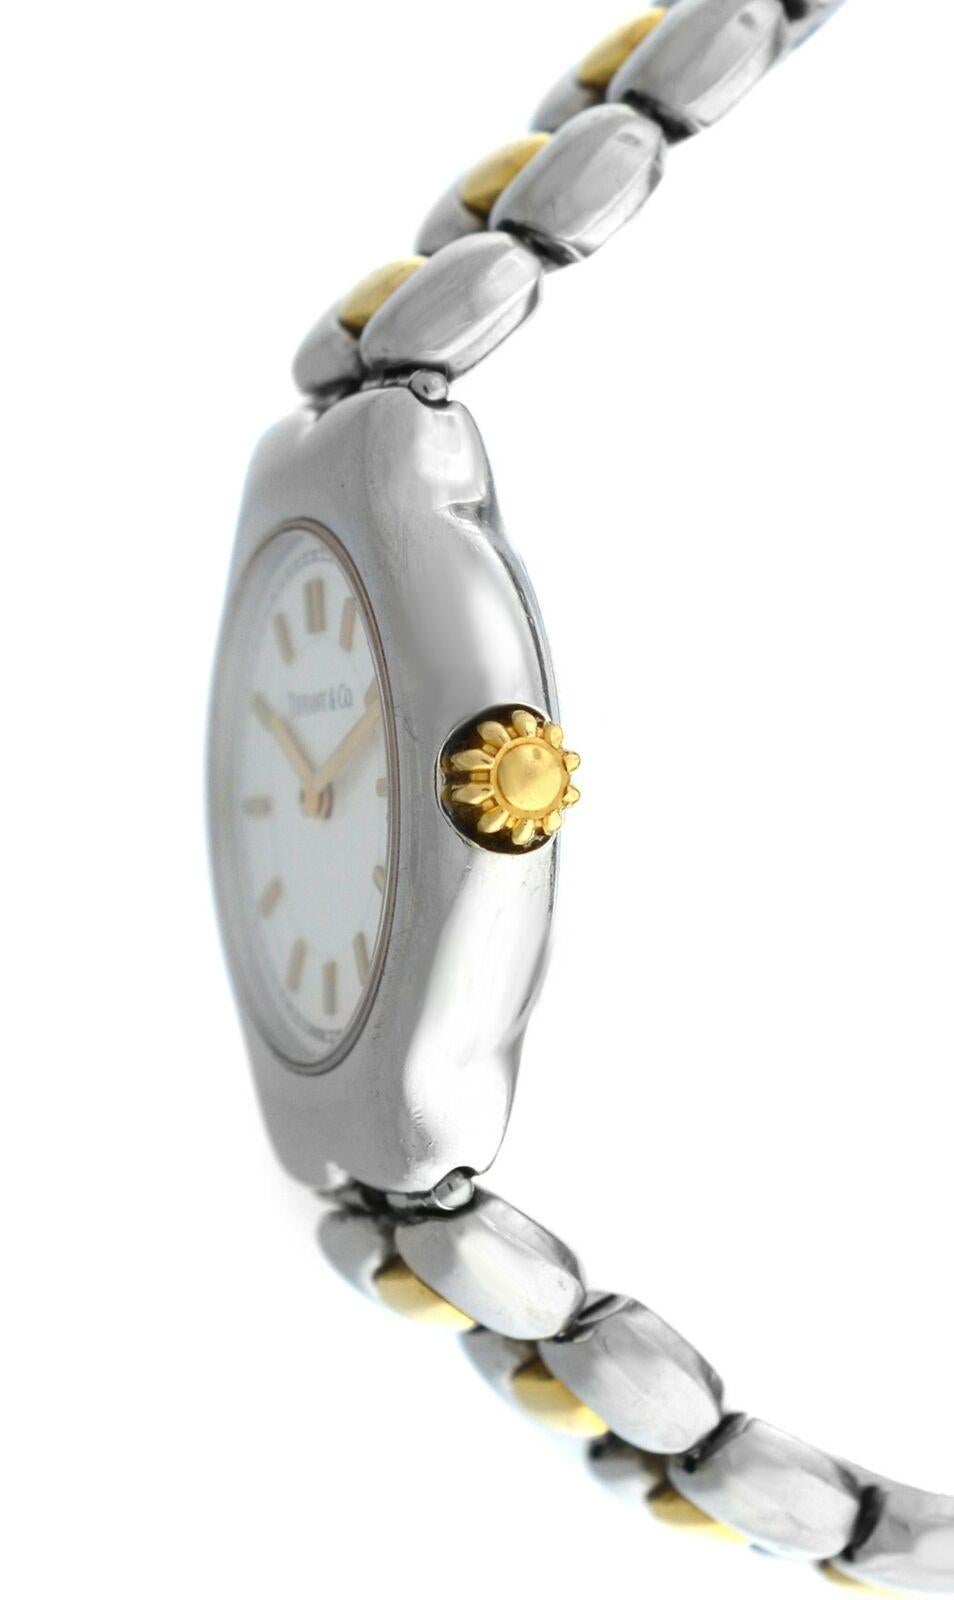 Brand	Tiffany & Co.
Model	Tesoro L0112
Gender	Ladies
Condition	Pre-owned
Movement	Swiss Quartz
Case Material	Stainless Steel & 18K Yellow Gold
Bracelet / Strap Material	
Stainless Steel & 18K Yellow Gold

Clasp / Buckle Material	
Stainless Steel